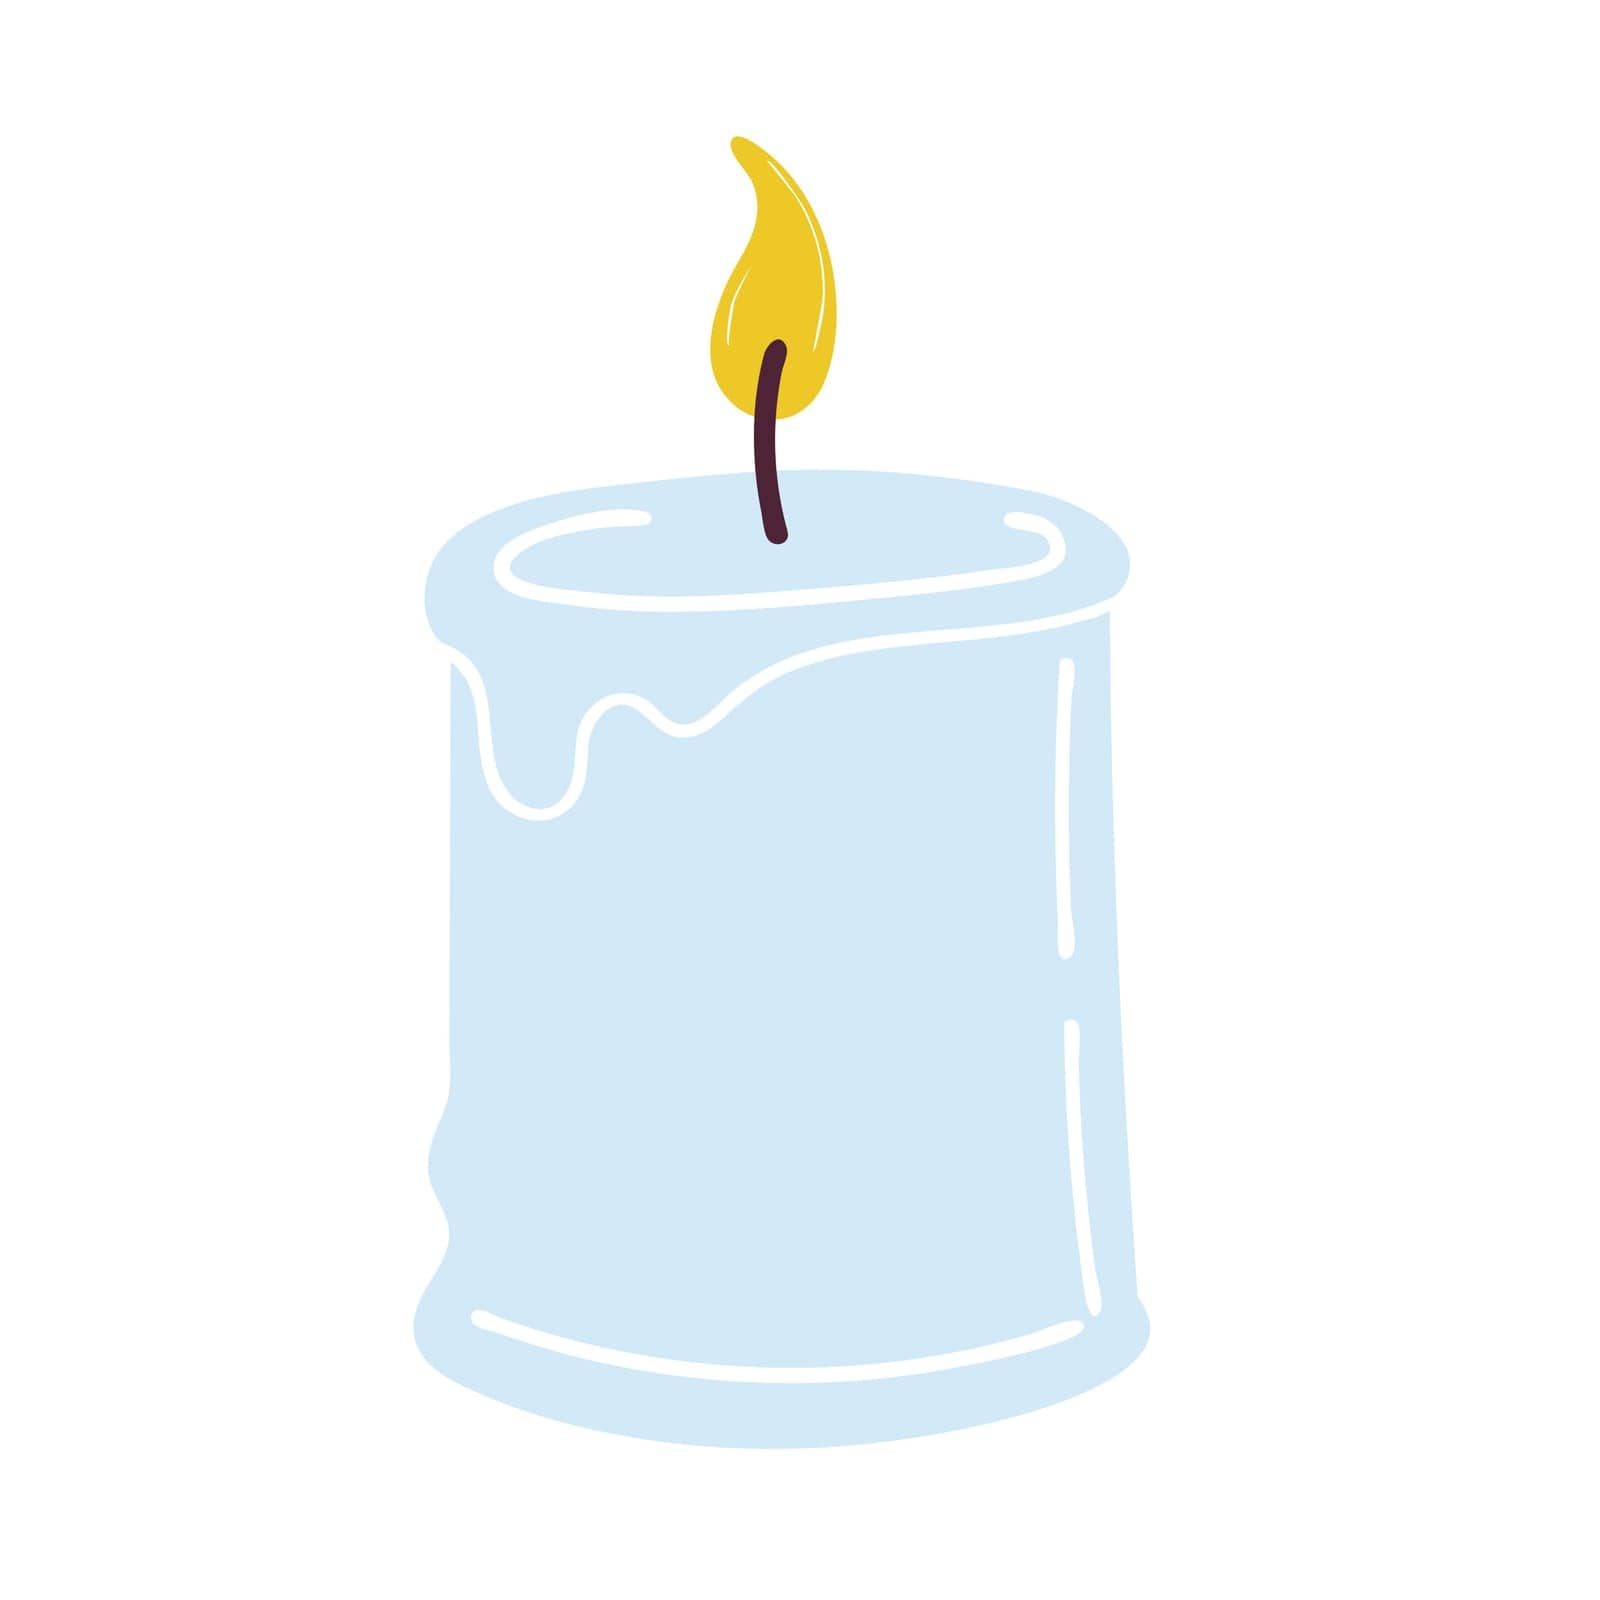 Burning aromatic candle for aromatherapy and interior decoration, isolated on a white background. Element for the design. Flat cartoon vector illustration